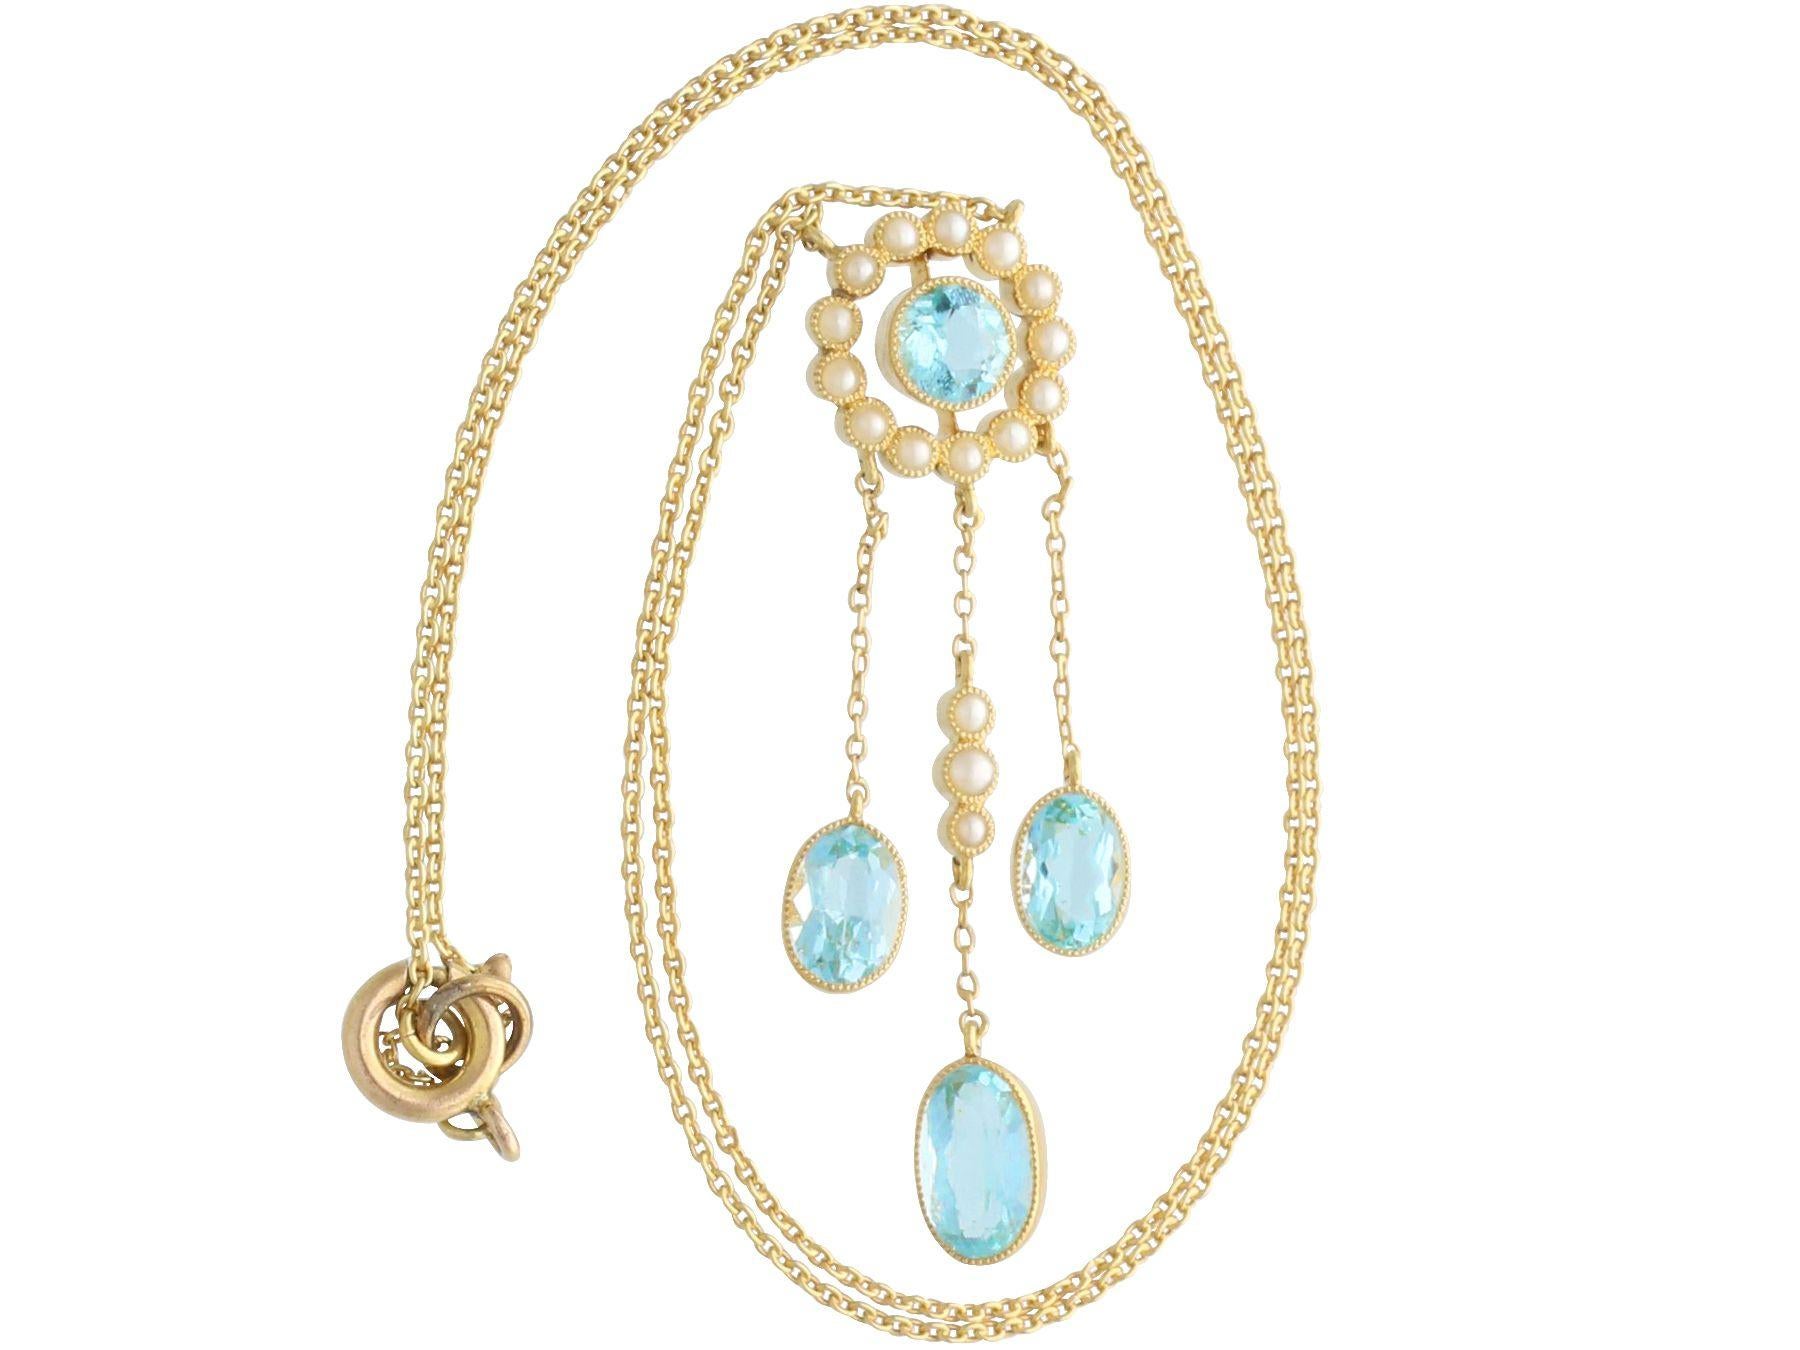 Antique 2.71 Carat Aquamarine and Pearl Yellow Gold Earring and Pendant Set In Excellent Condition For Sale In Jesmond, Newcastle Upon Tyne